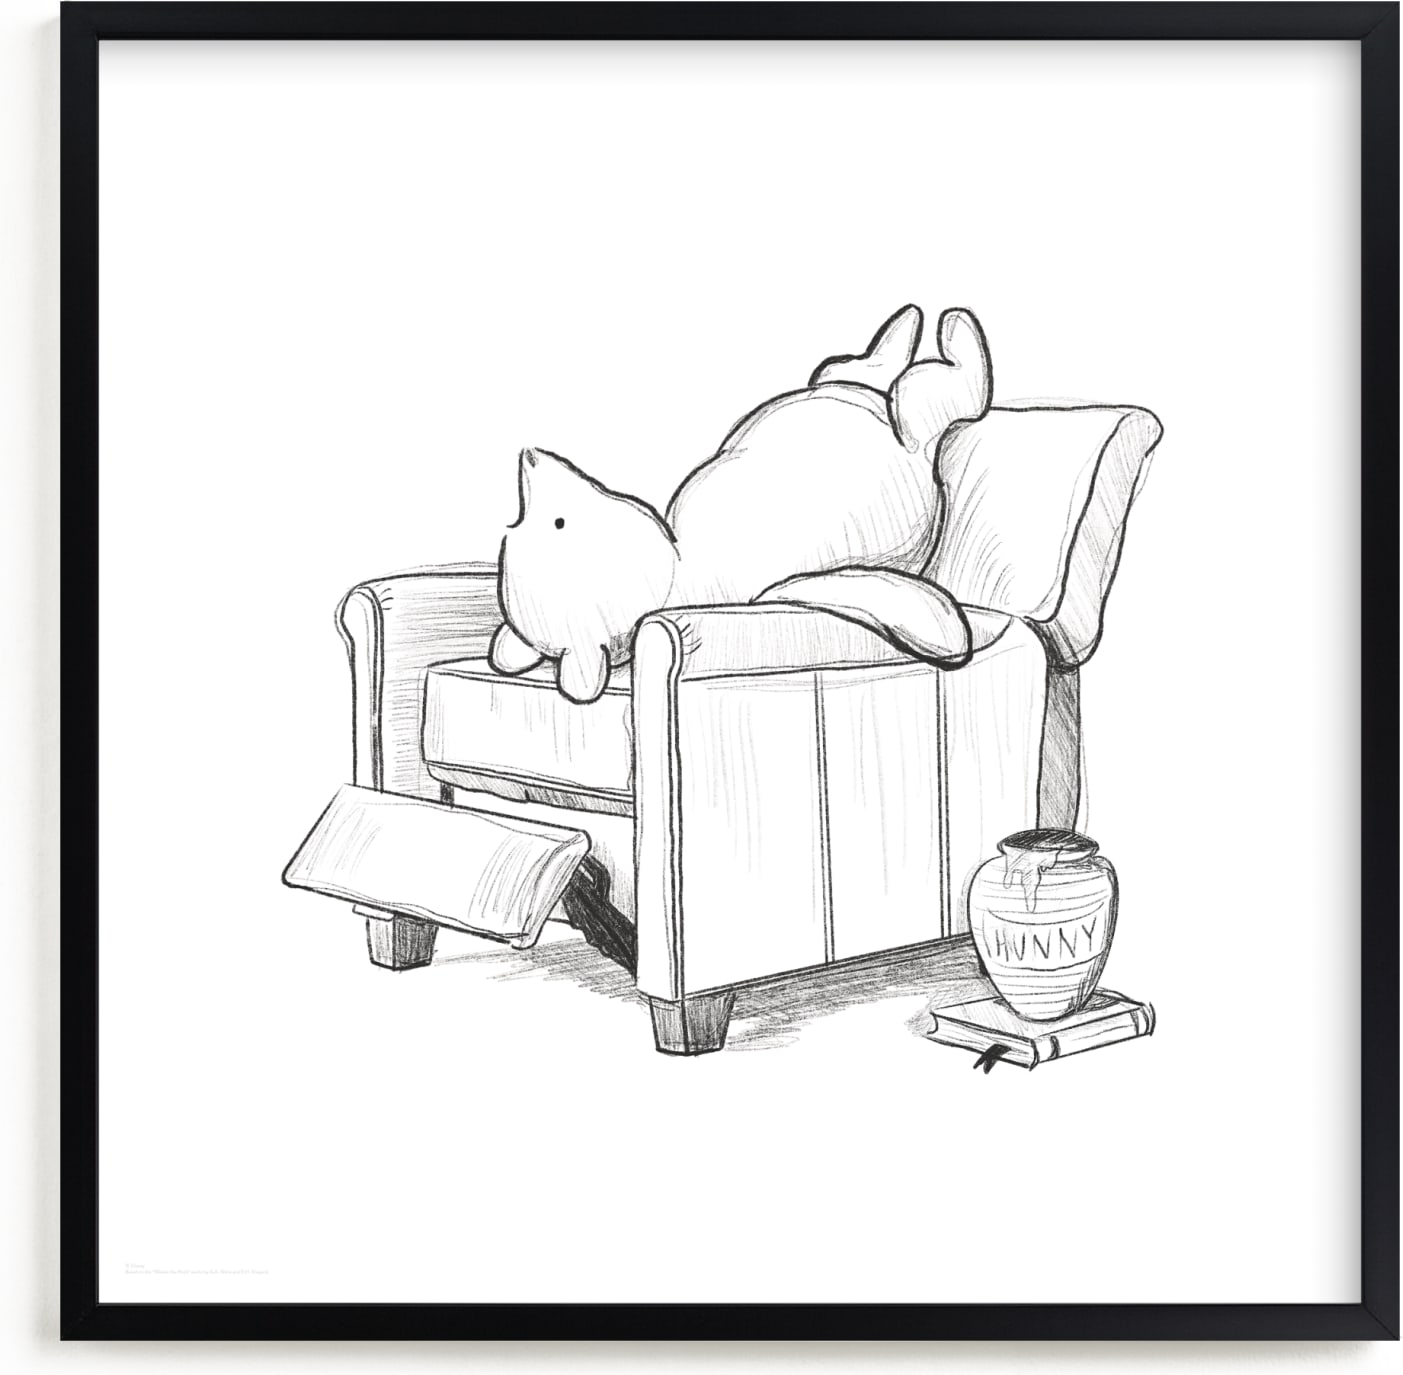 This is a black and white disney art by Stefanie Lane called Pooh Lounging | Winnie The Pooh.